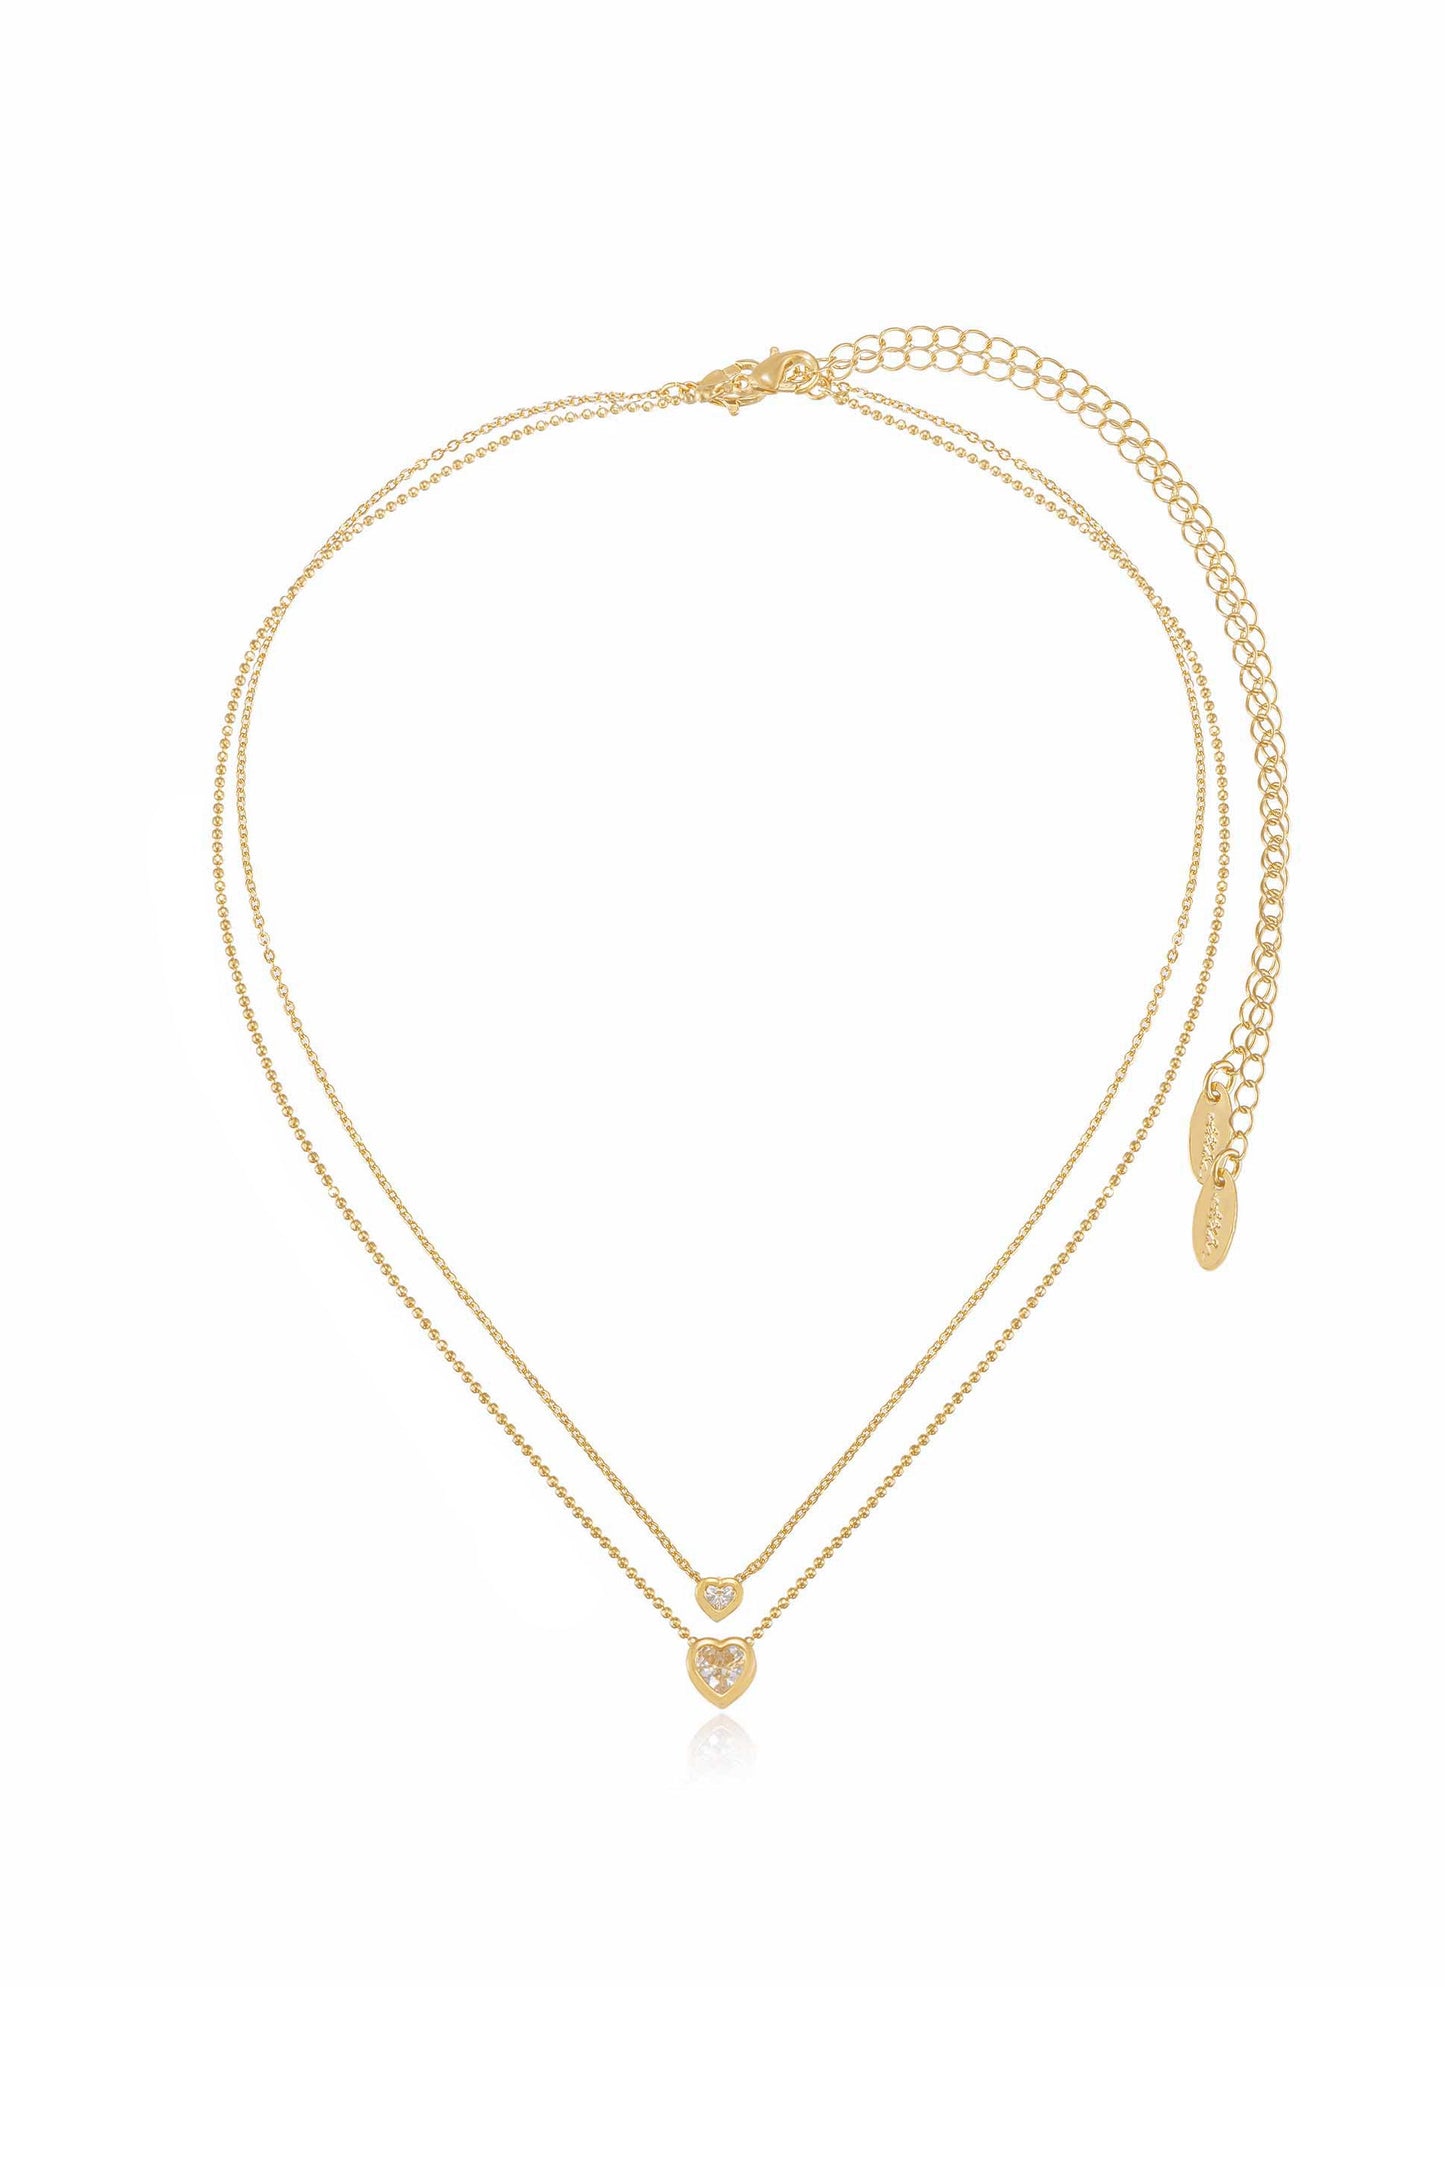 Simple Kind of Life Dainty 18k Gold Plated Chain and Crystal Layered Necklace Set full